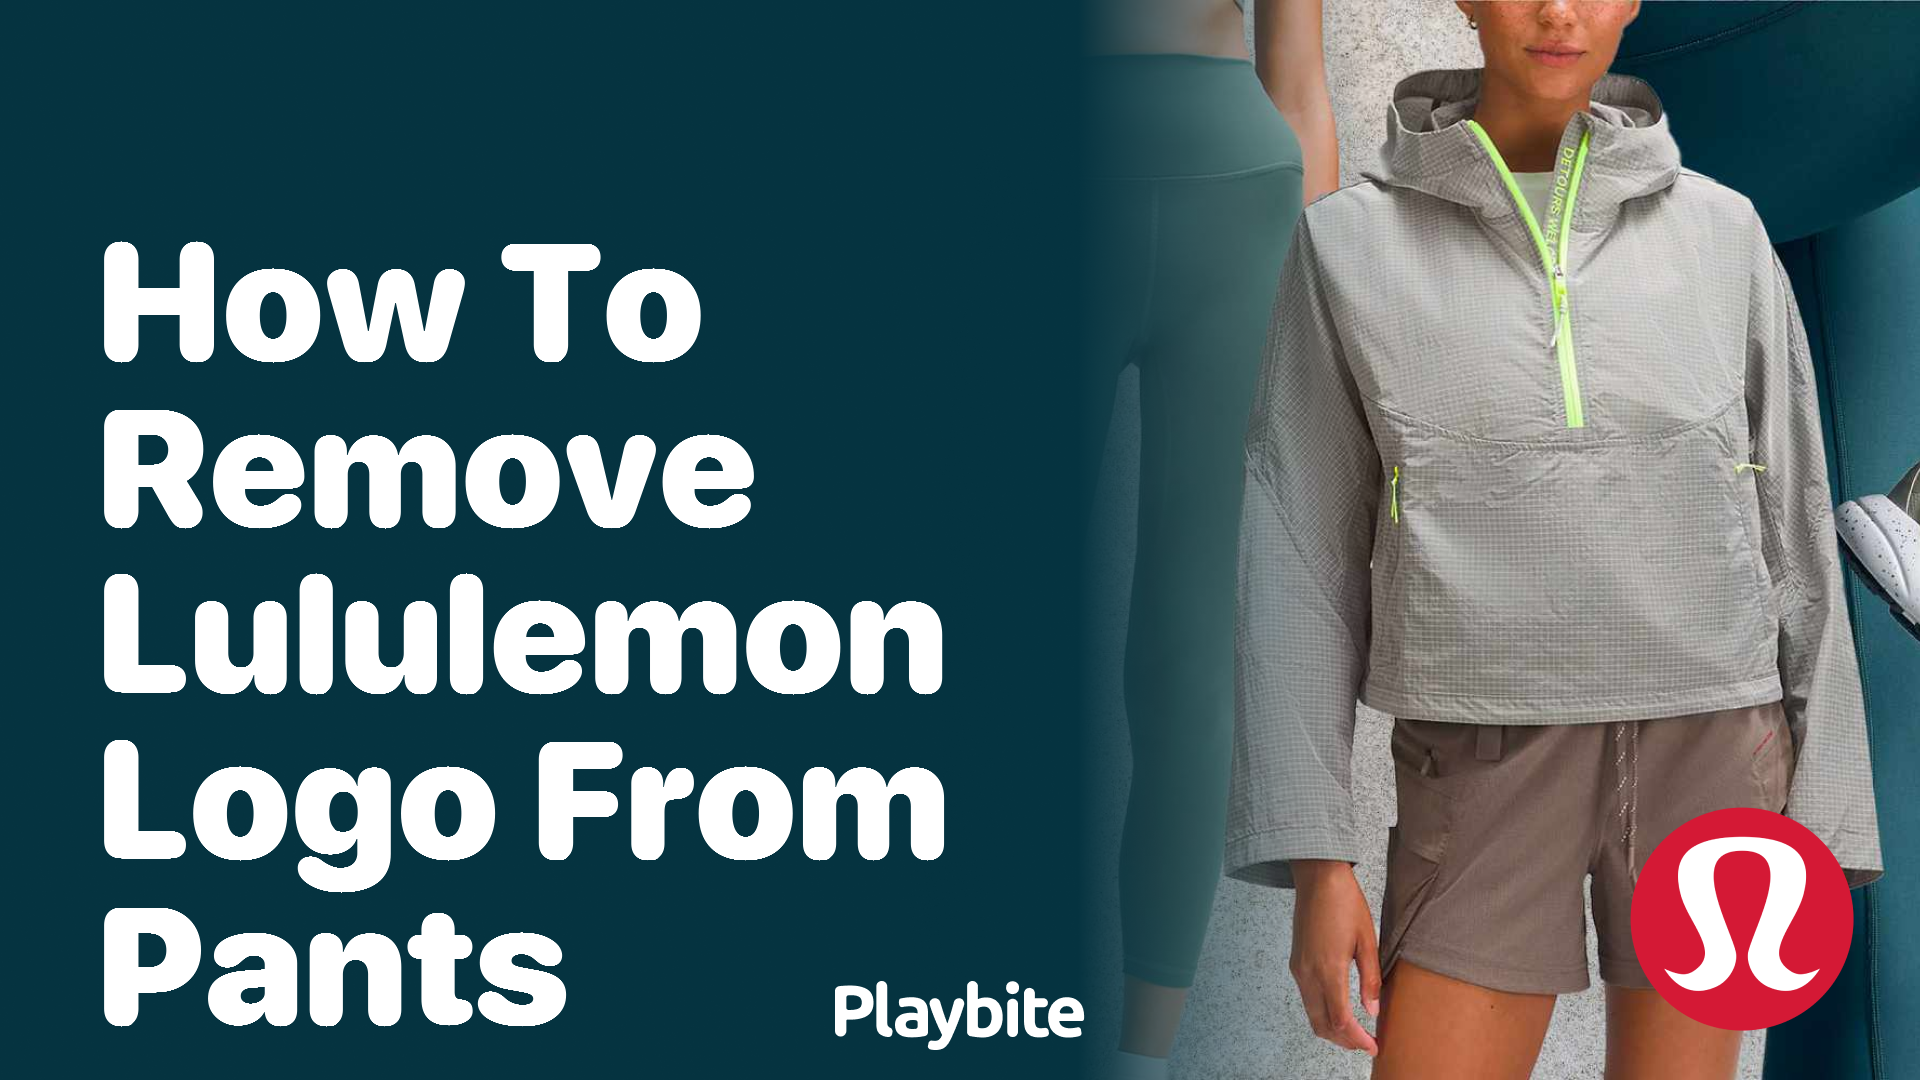 How to Remove the Lululemon Logo from Pants - Playbite